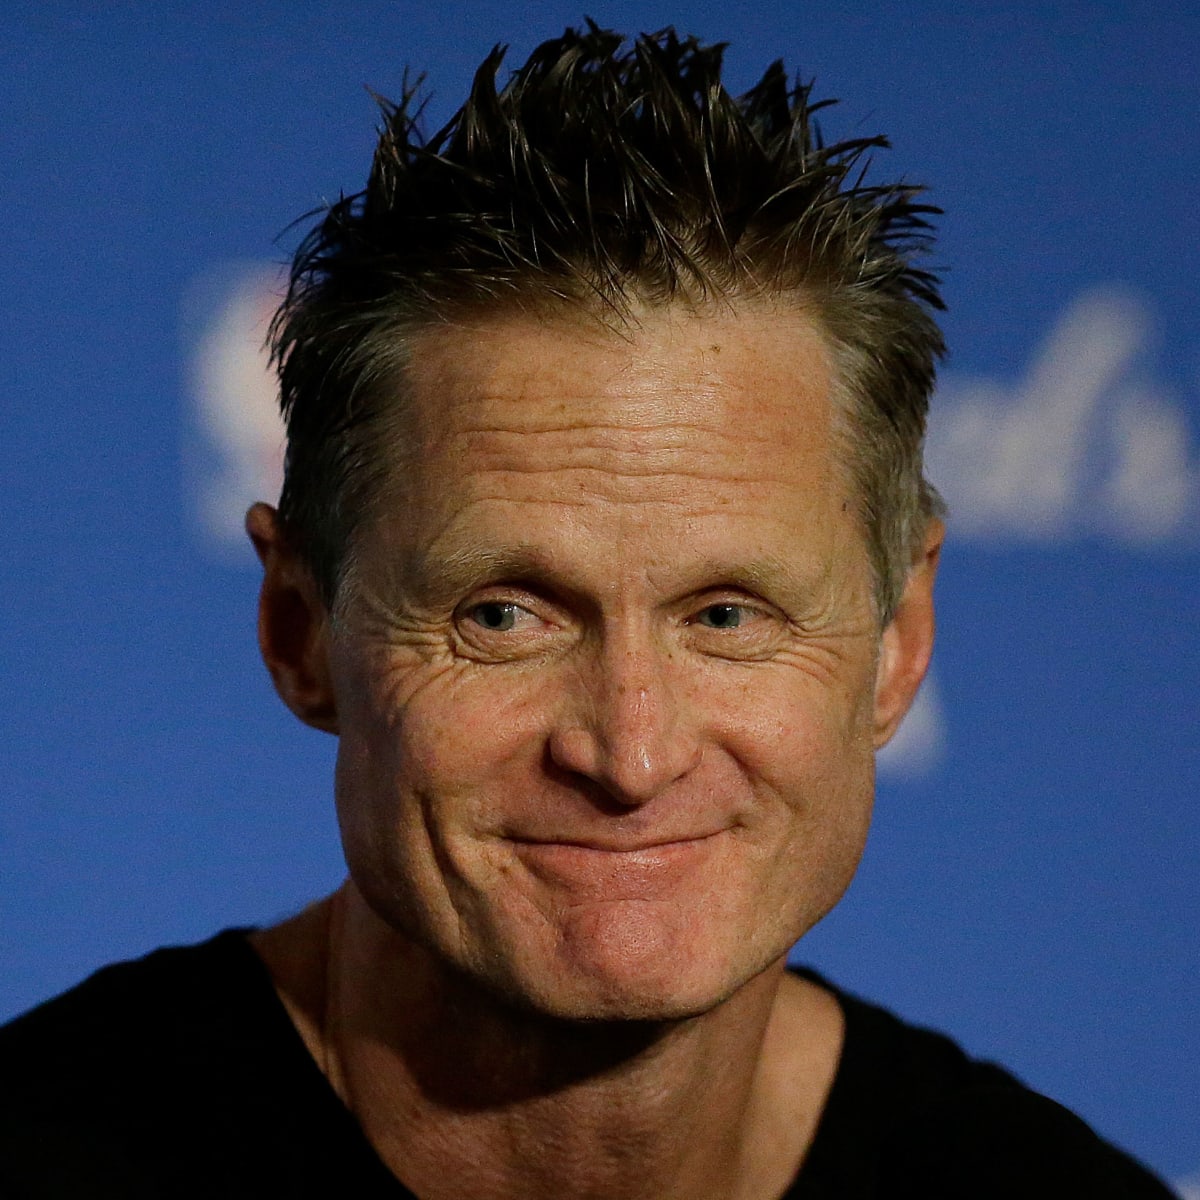 Warriors' Steve Kerr 'glad that tradition is back in play' for NBA champs  visiting White House